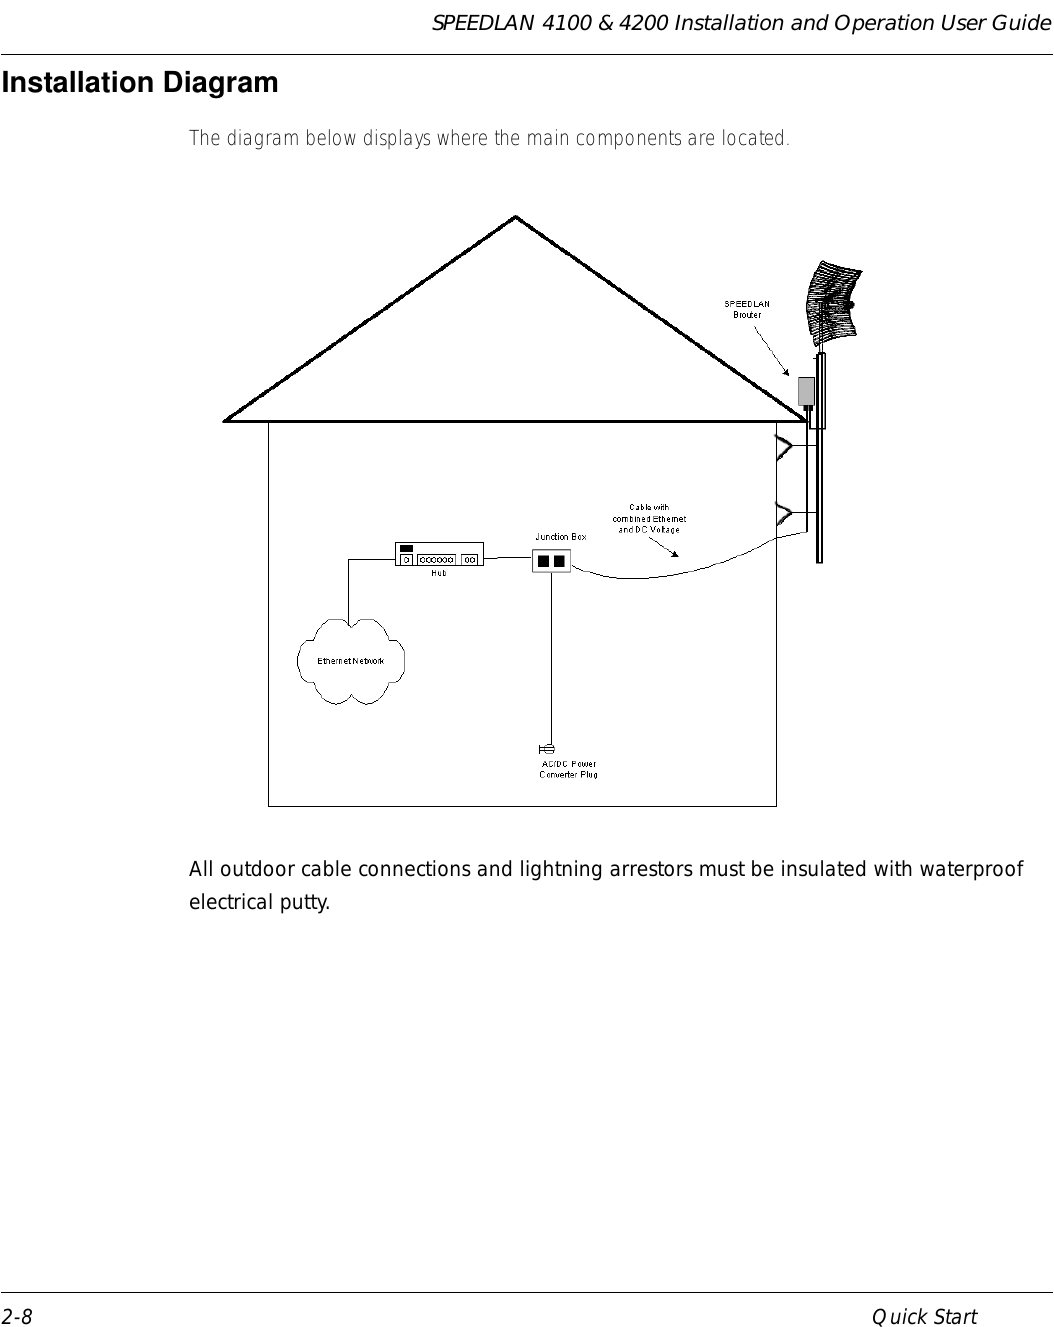 SPEEDLAN 4100 &amp; 4200 Installation and Operation User Guide 2-8 Quick StartInstallation DiagramThe diagram below displays where the main components are located. All outdoor cable connections and lightning arrestors must be insulated with waterproof electrical putty.                